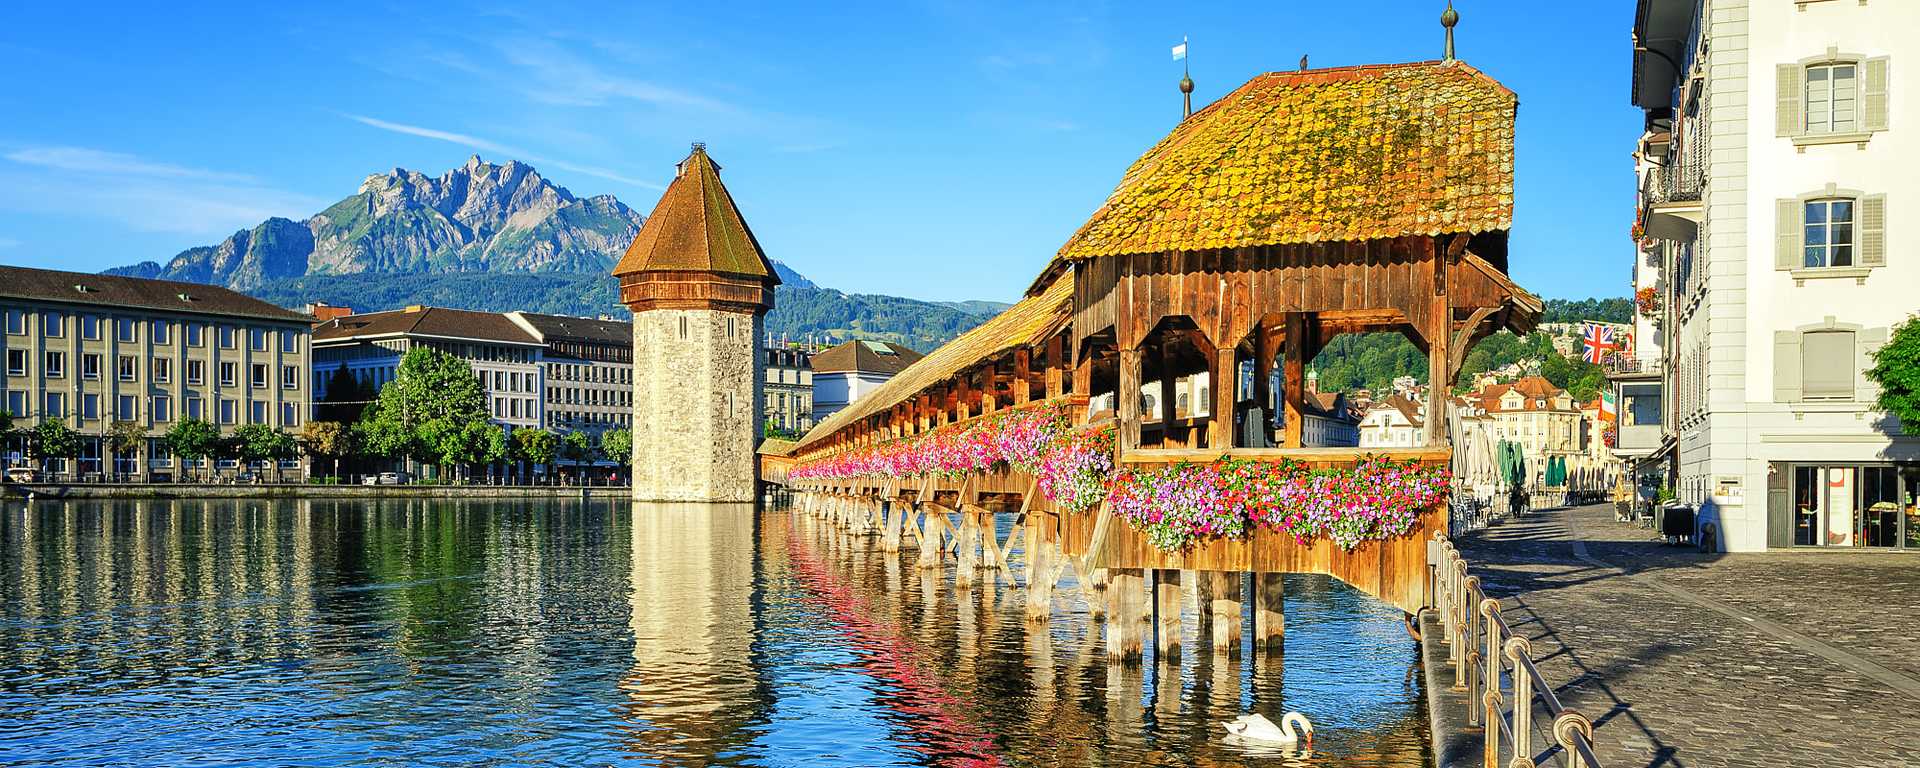 Flower covered wooden chapel bridge and water tower in Lucerne, Switzerland